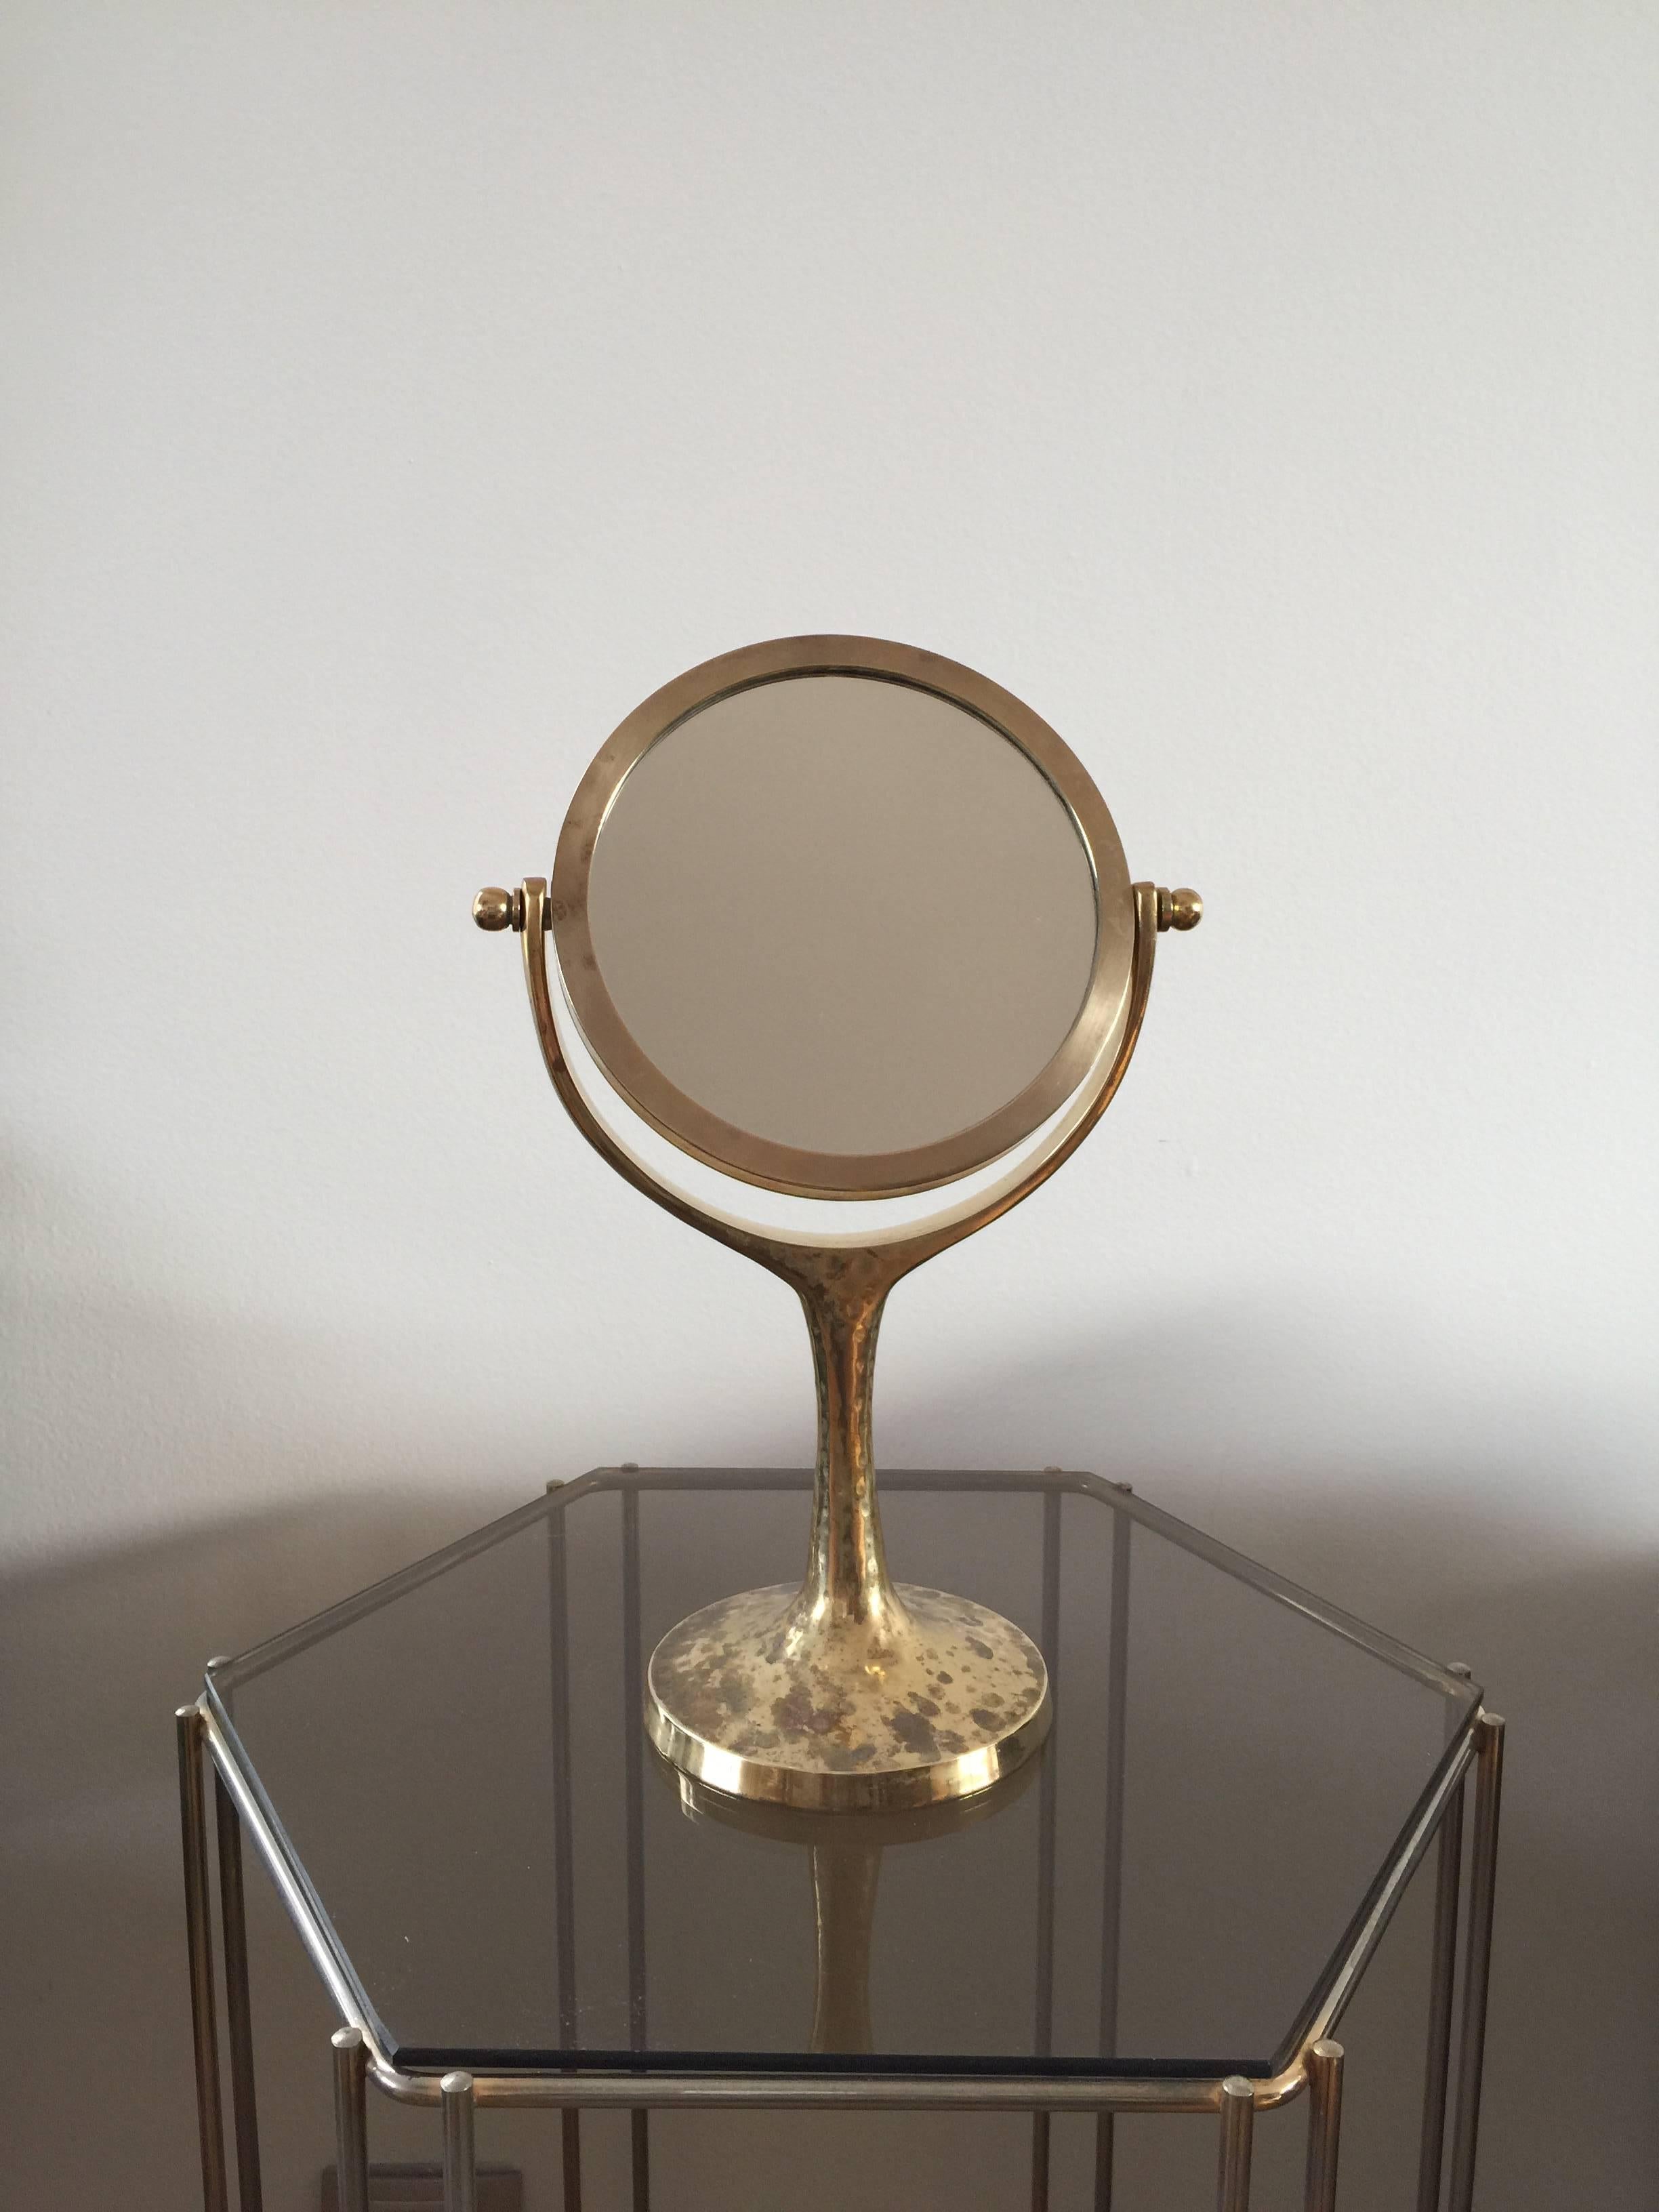 Hammered brass stand.
Beautiful patina.
Mirror on both sides.
Fully adjustable.
This item will ship from Paris.
Price does not include handling, shipping and possible customs related charges.